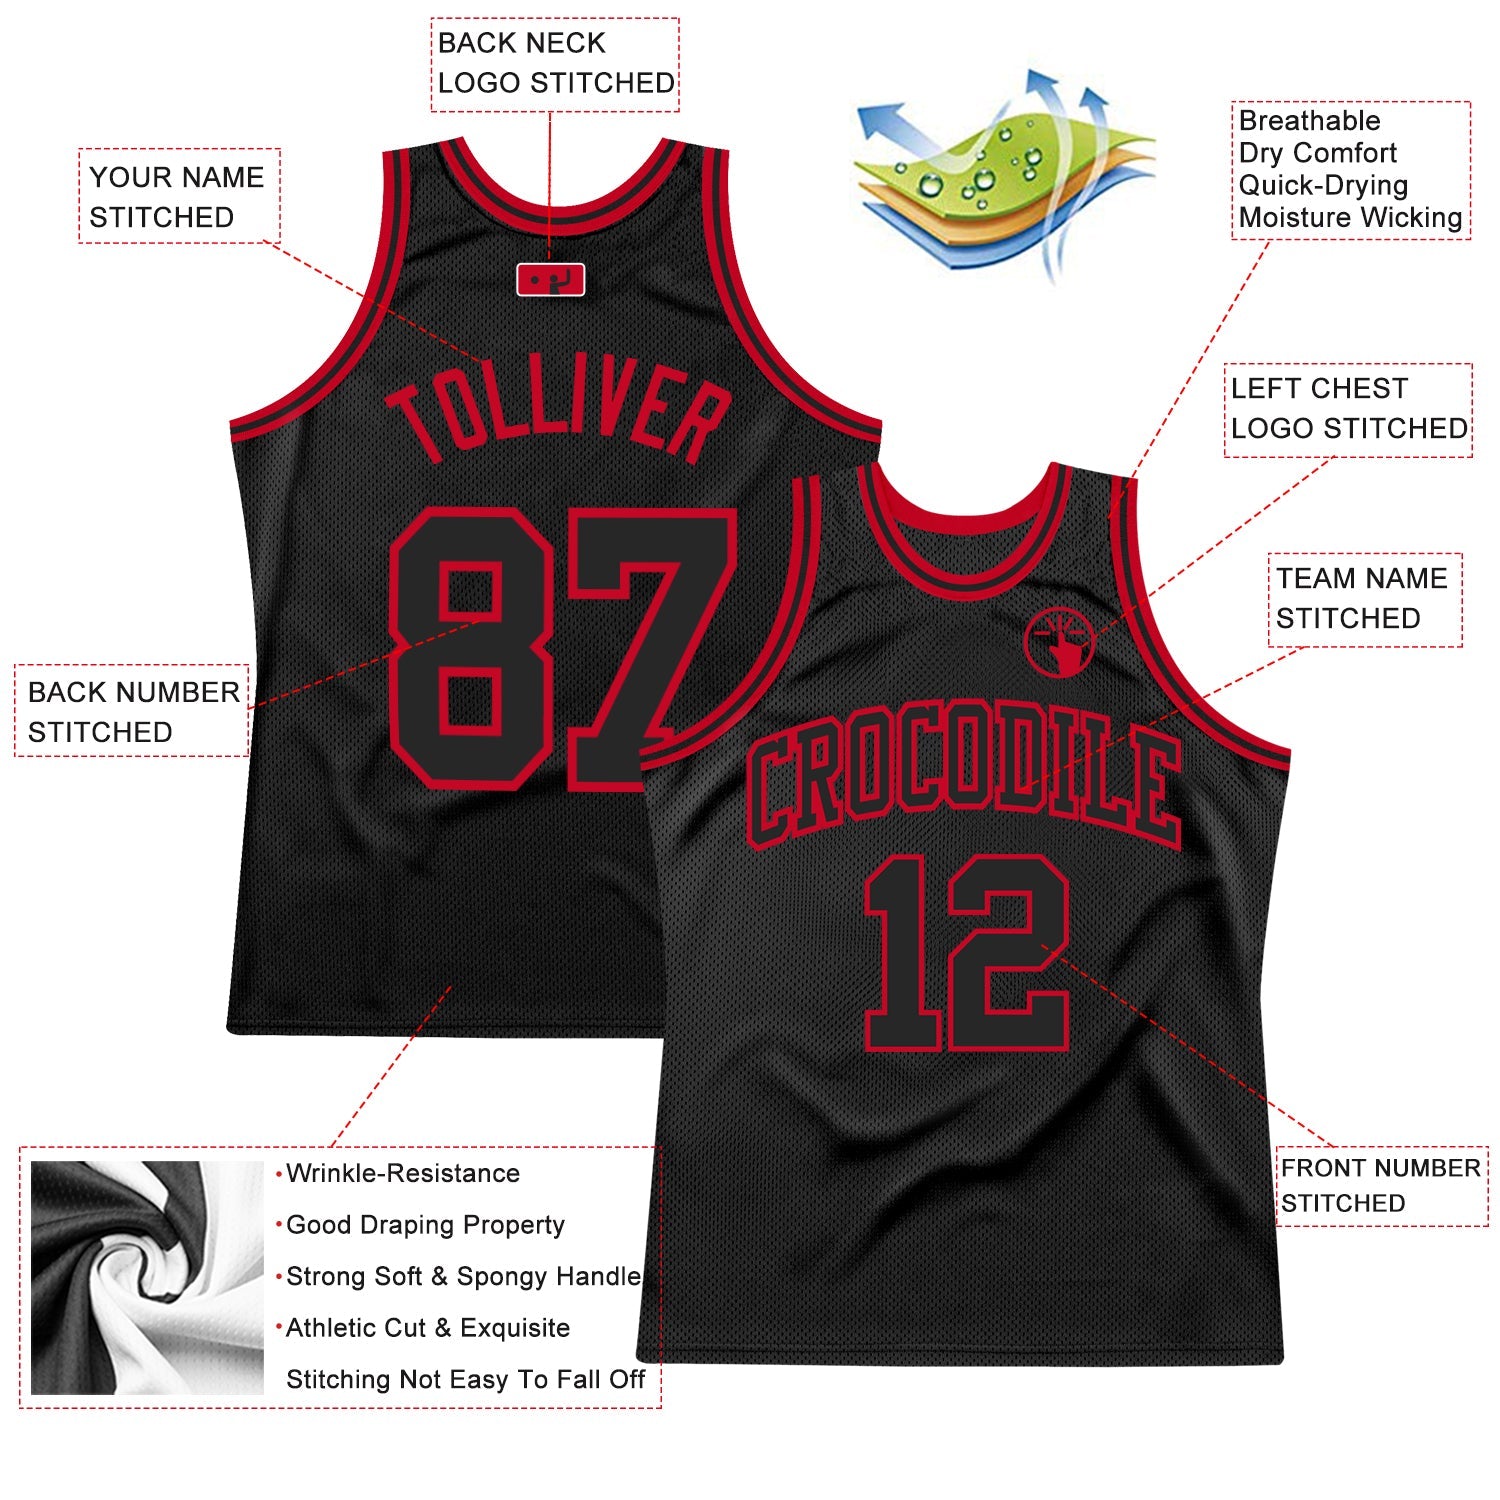 Custom Black Black-Red Authentic Throwback Basketball Jersey